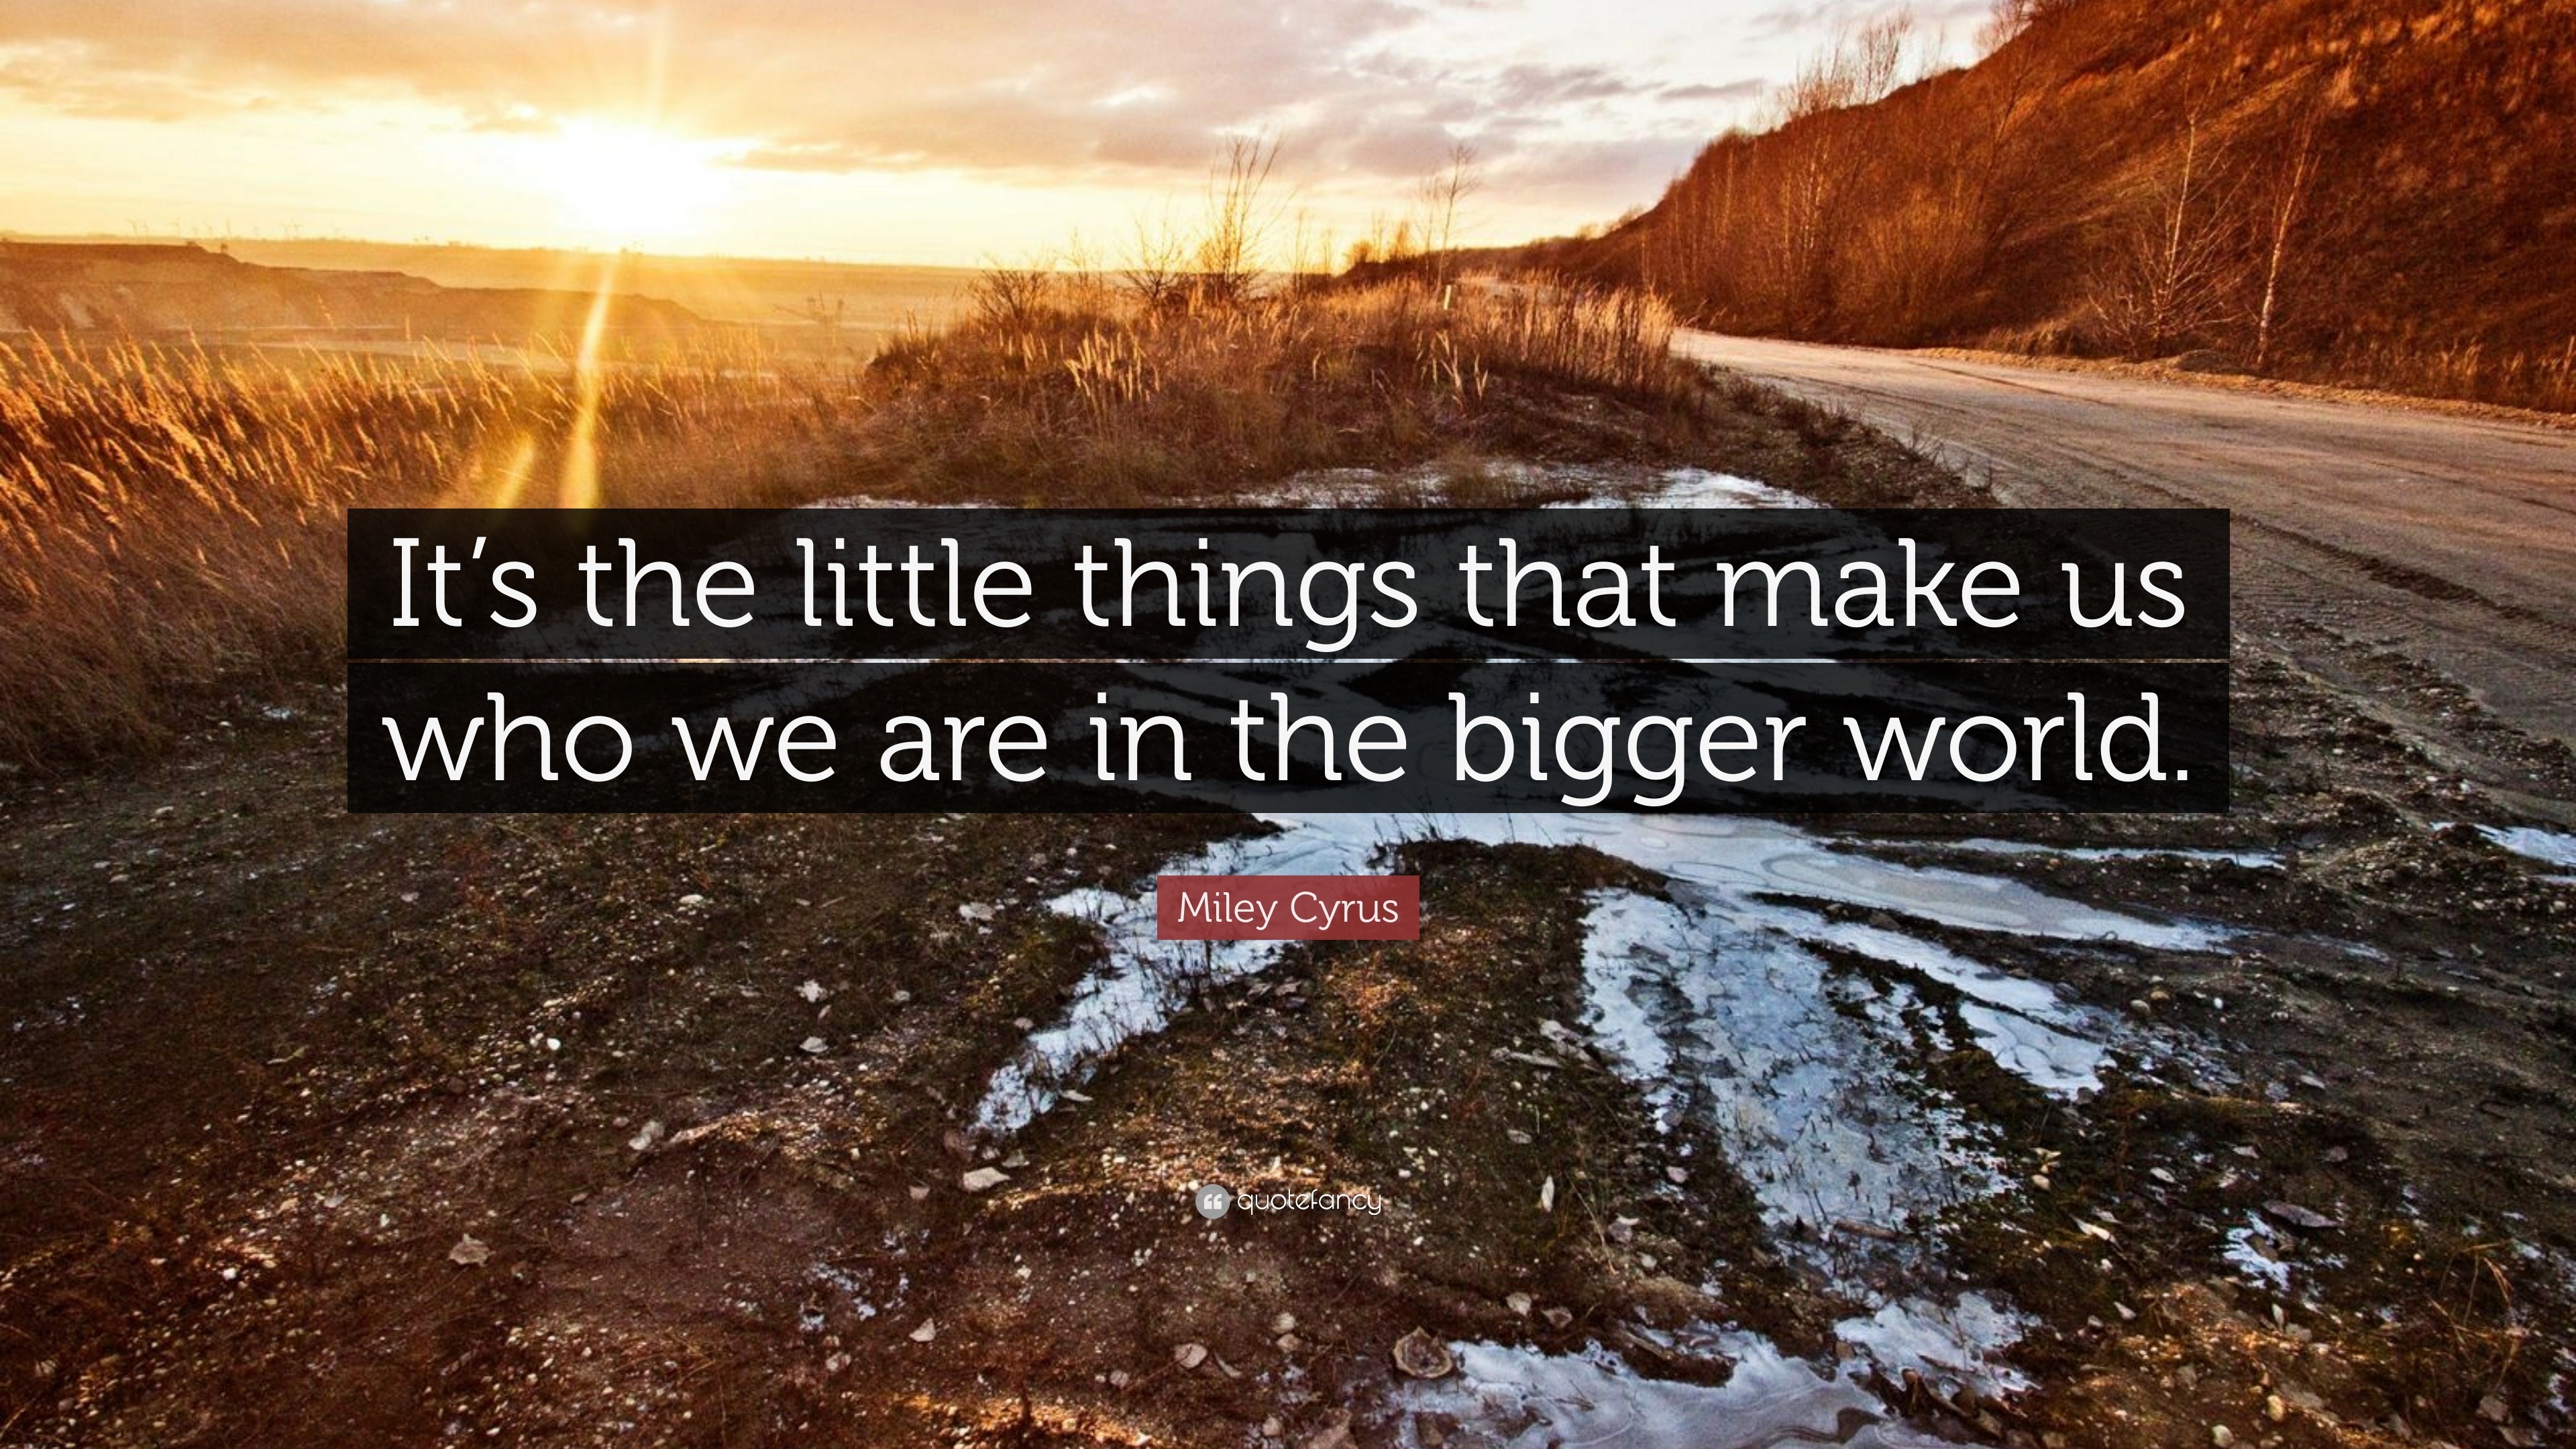 Miley Cyrus Quote “its The Little Things That Make Us Who We Are In